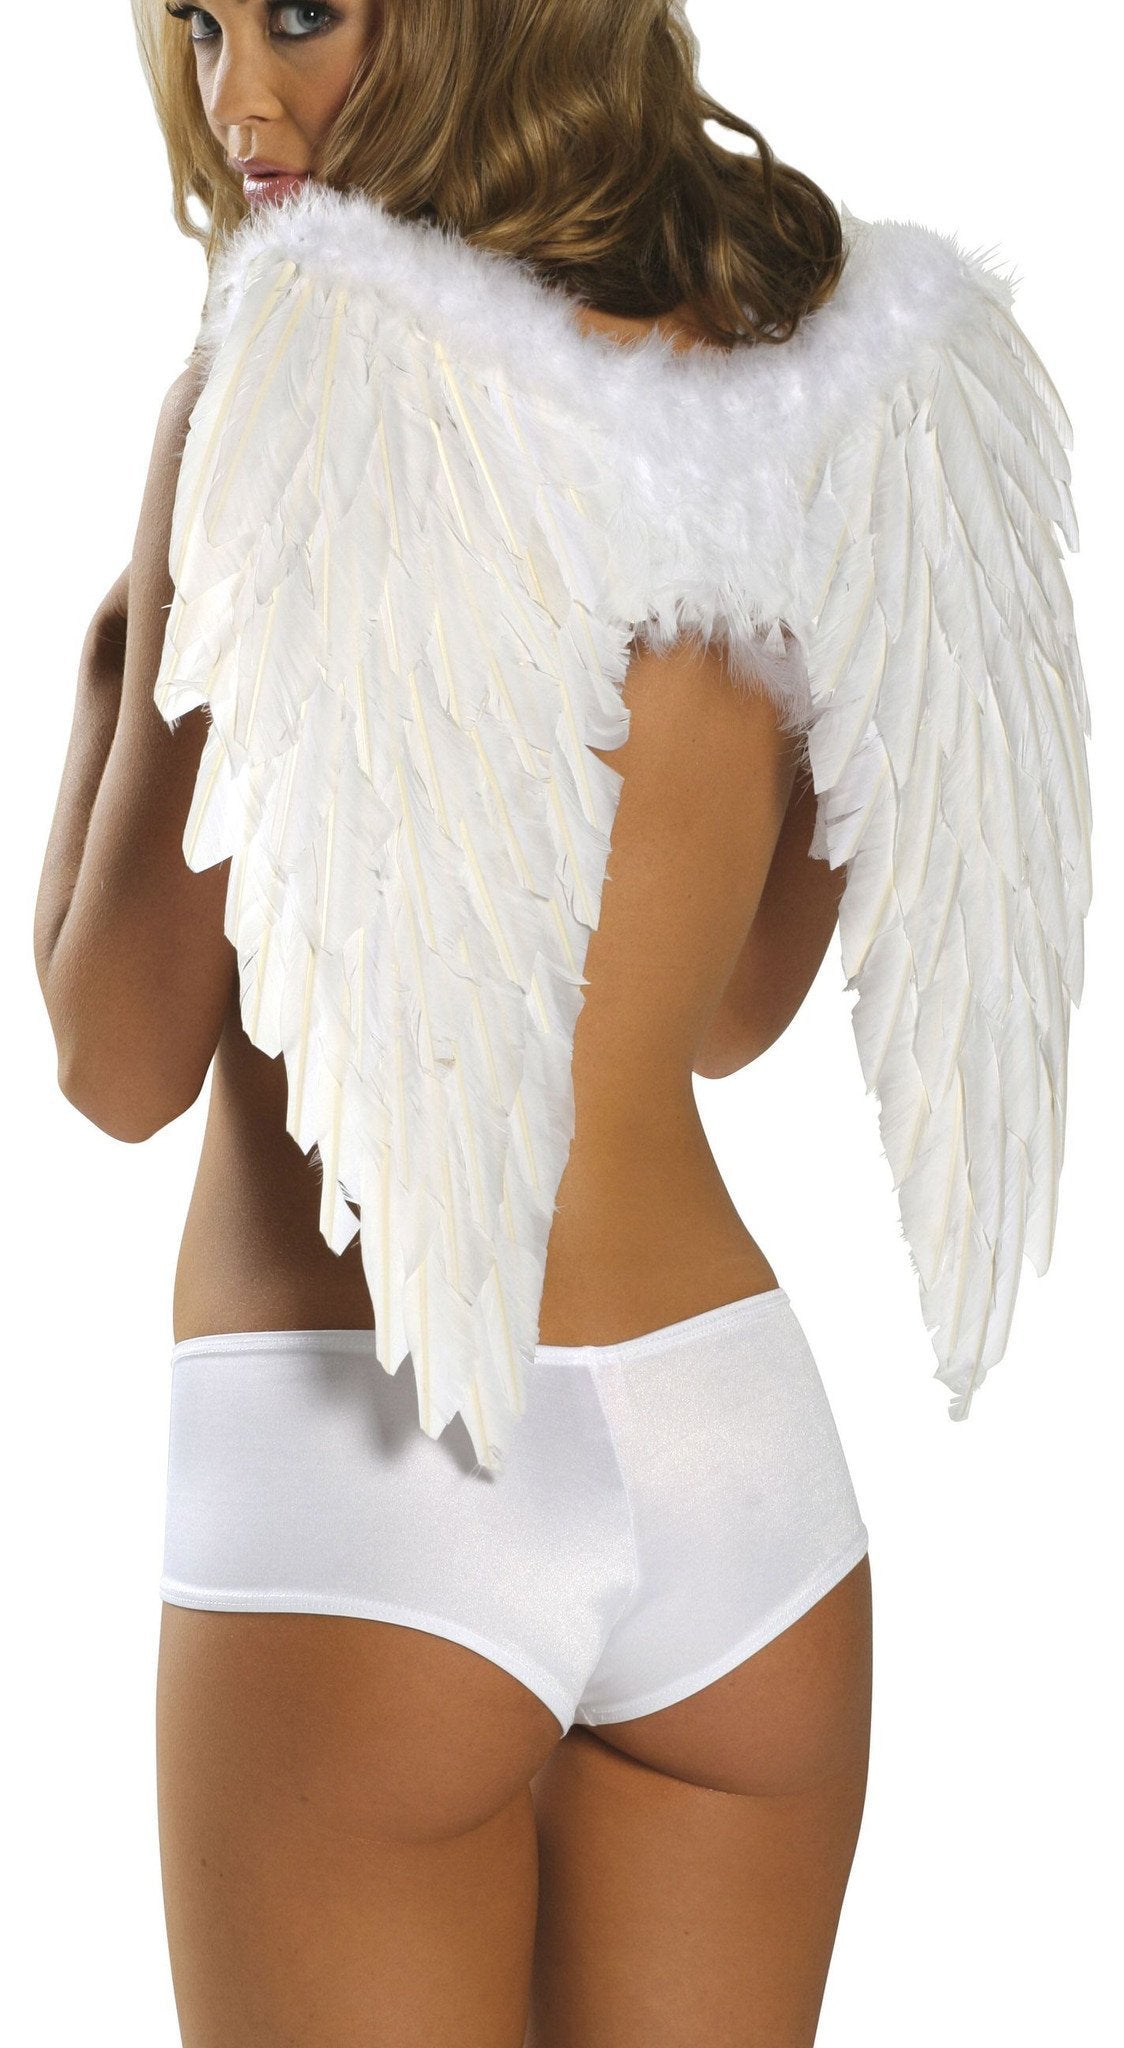 Buy Feathered Wings from RomaRetailShop for 29.99 with Same Day Shipping Designed by Roma Costume 1361-Wht-O/S